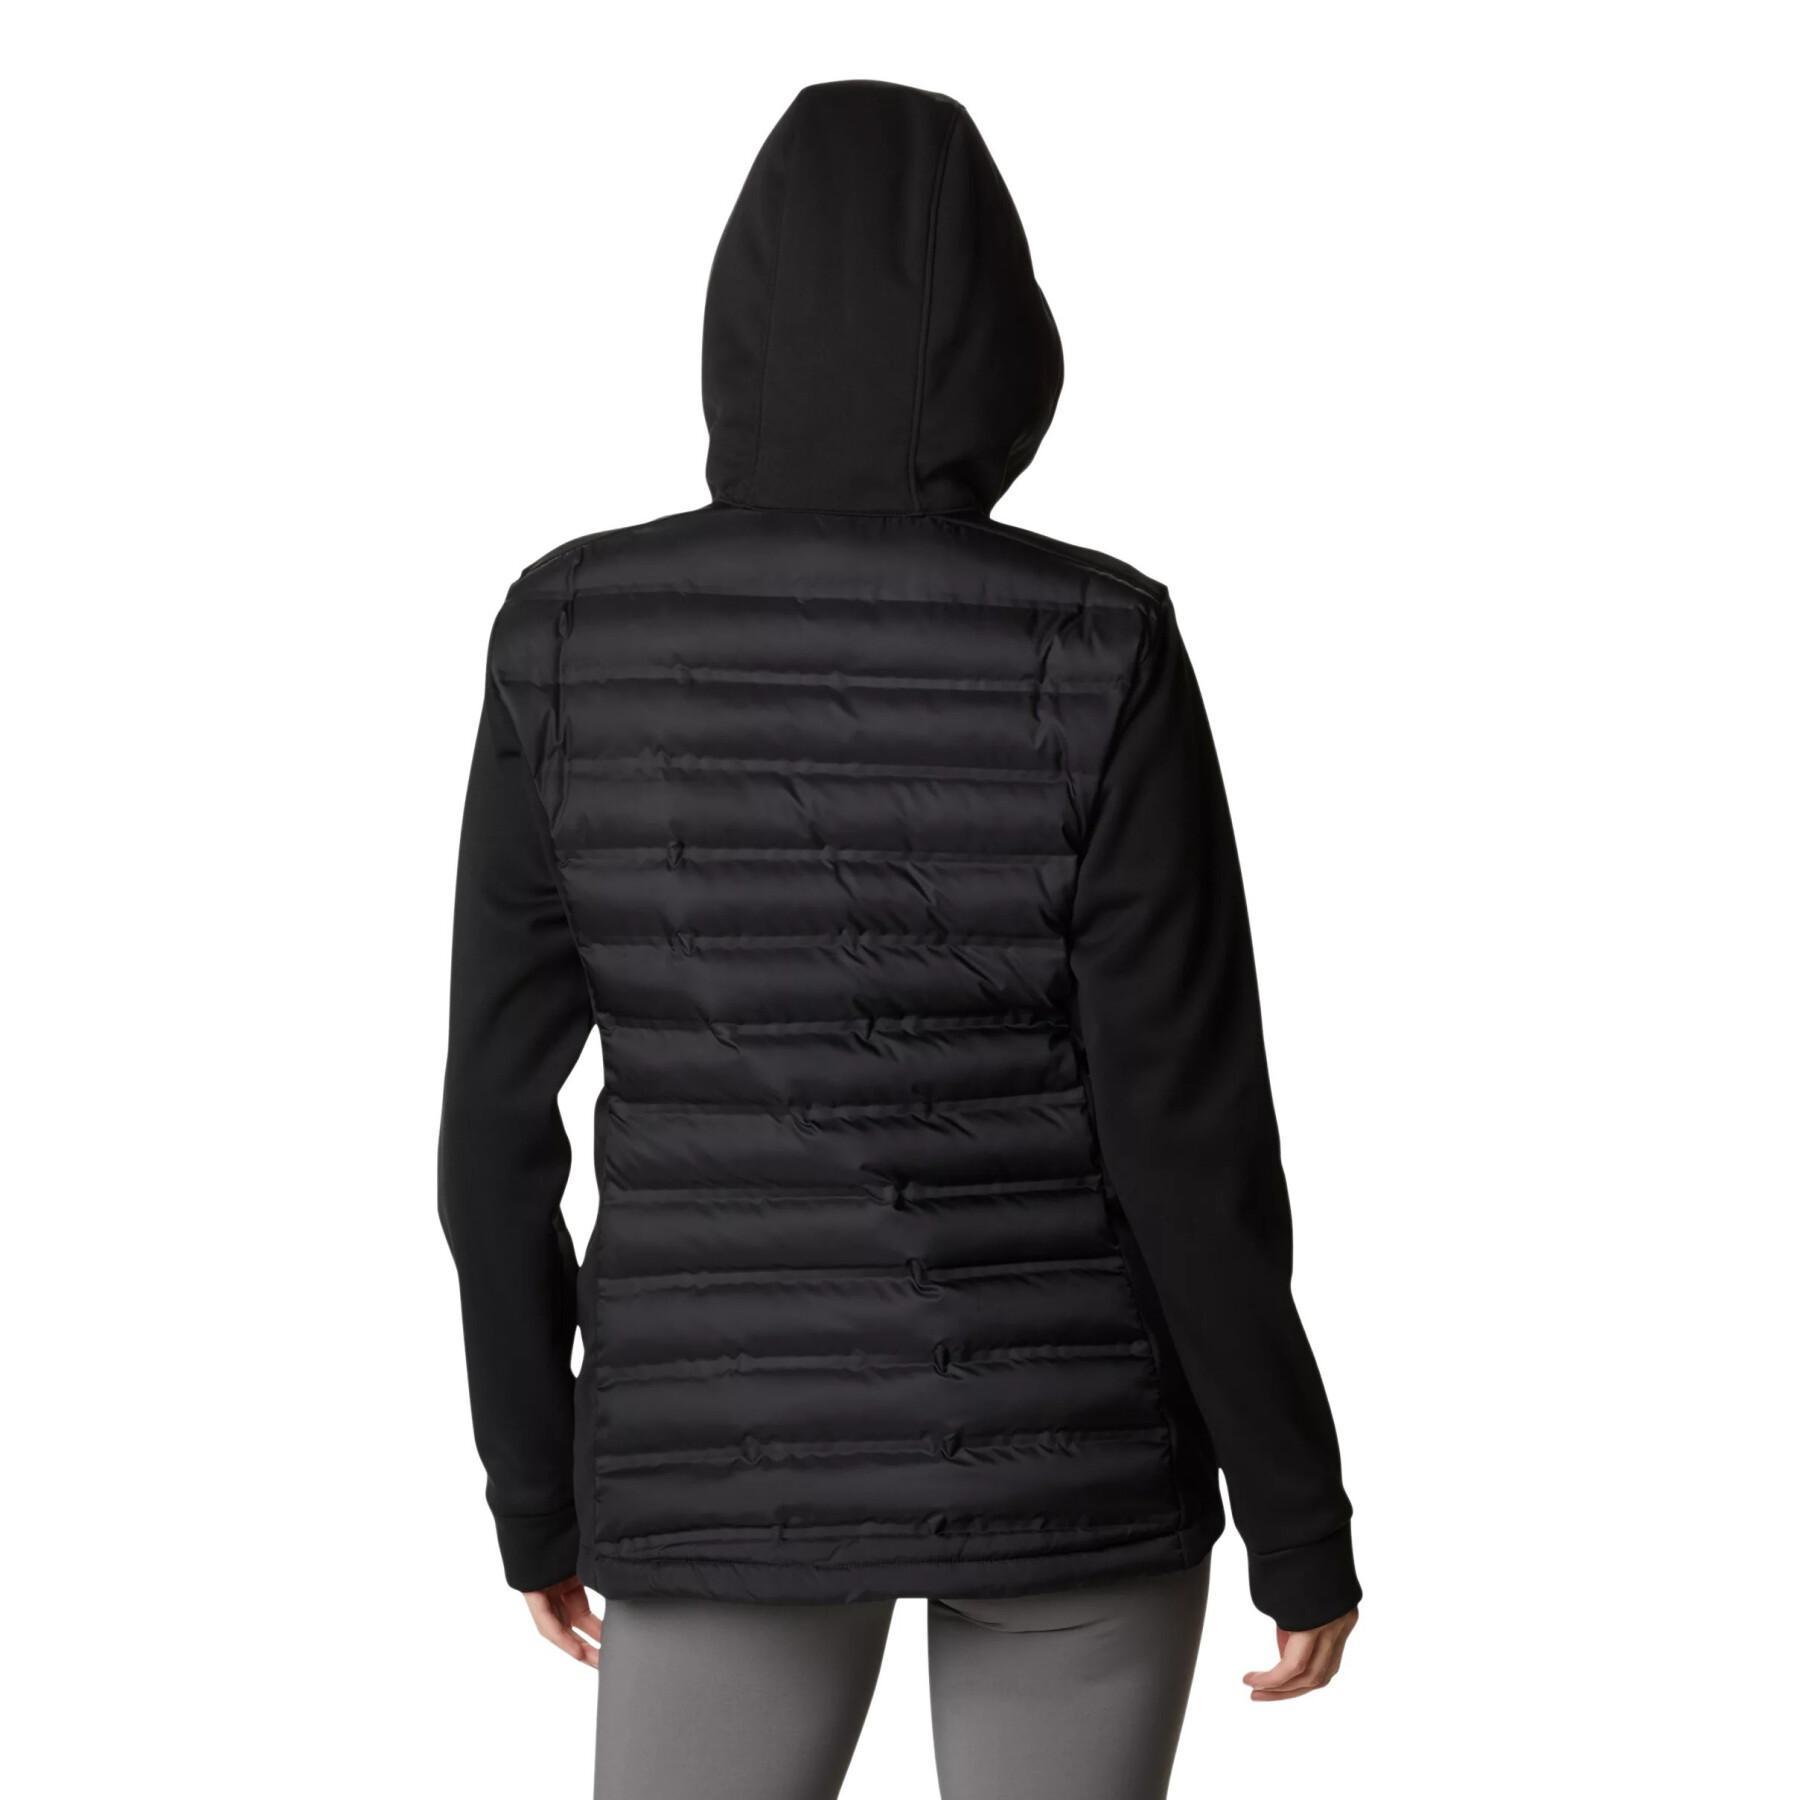 Women's hooded sweatshirt Columbia Out-Shield Insulated FZ